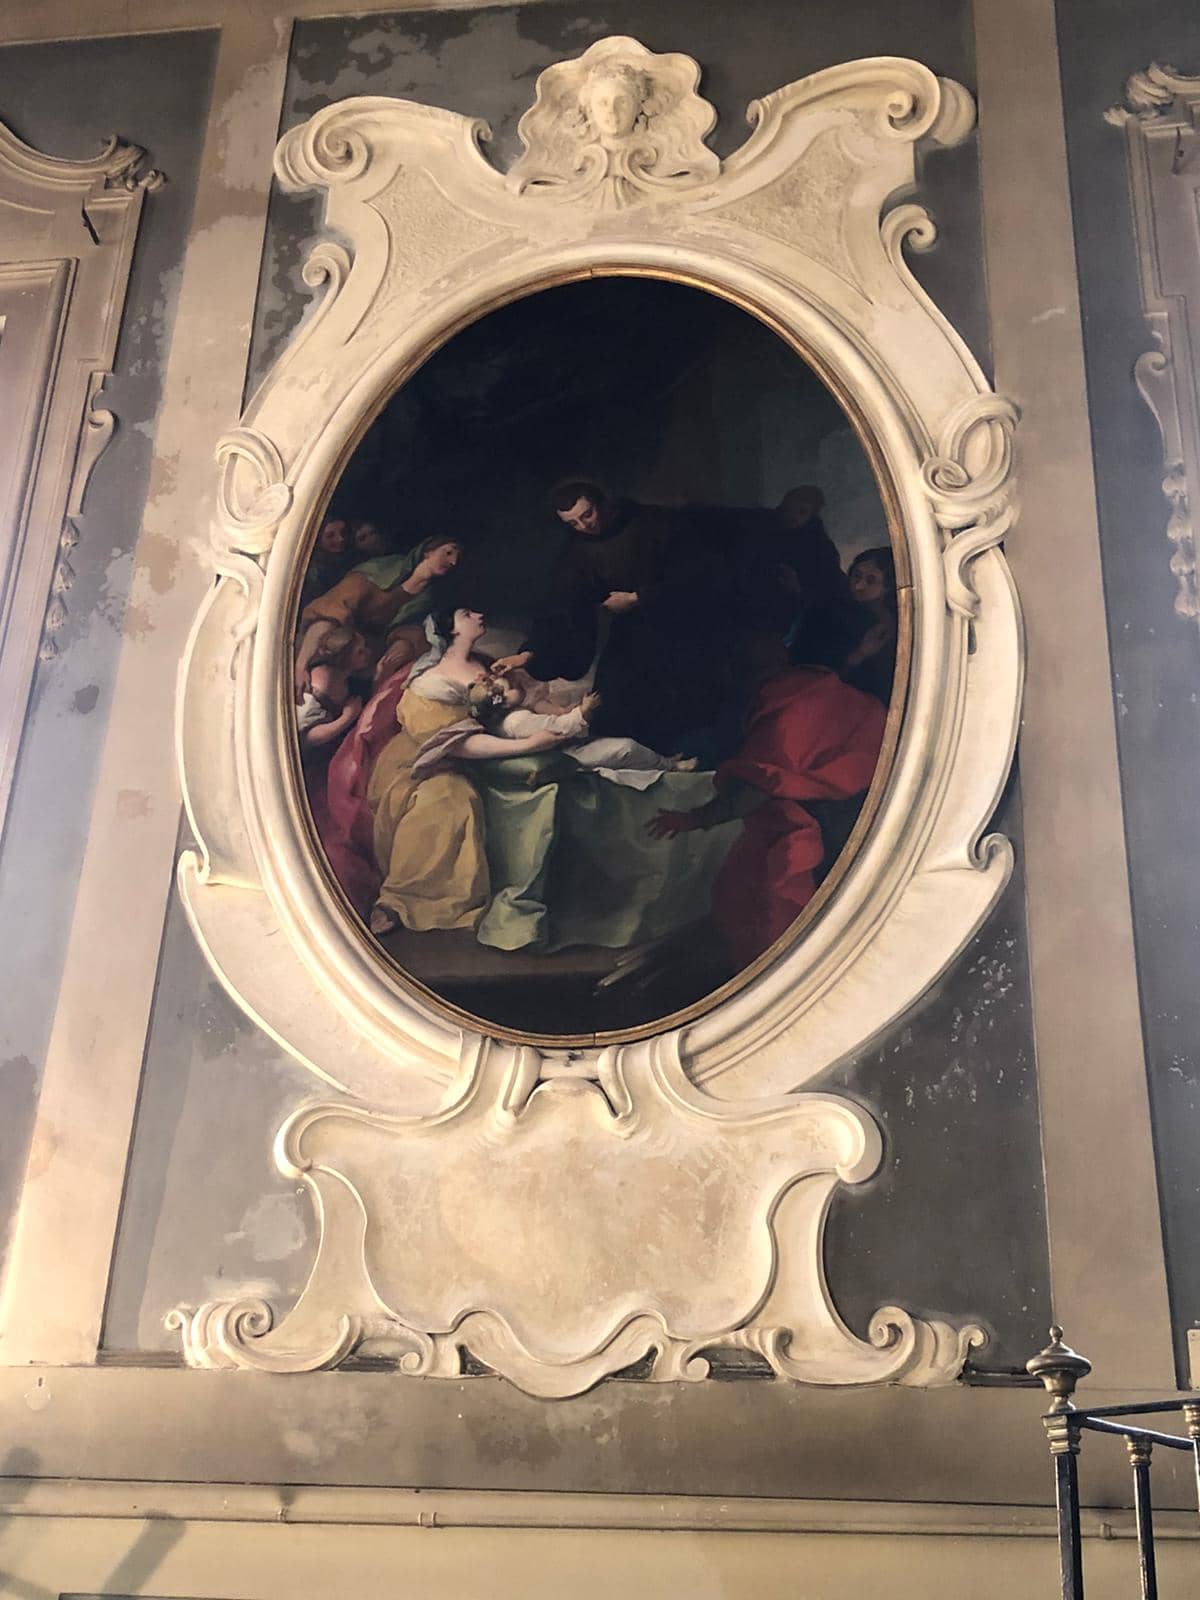 An oval painting in an elaborate marble frame, part of an architectural decoration. A man in a long black robe places his hand on the forehead of a sick child, who is being held by their mother. The mother and the other figures gathered around them look at the man with desperation.